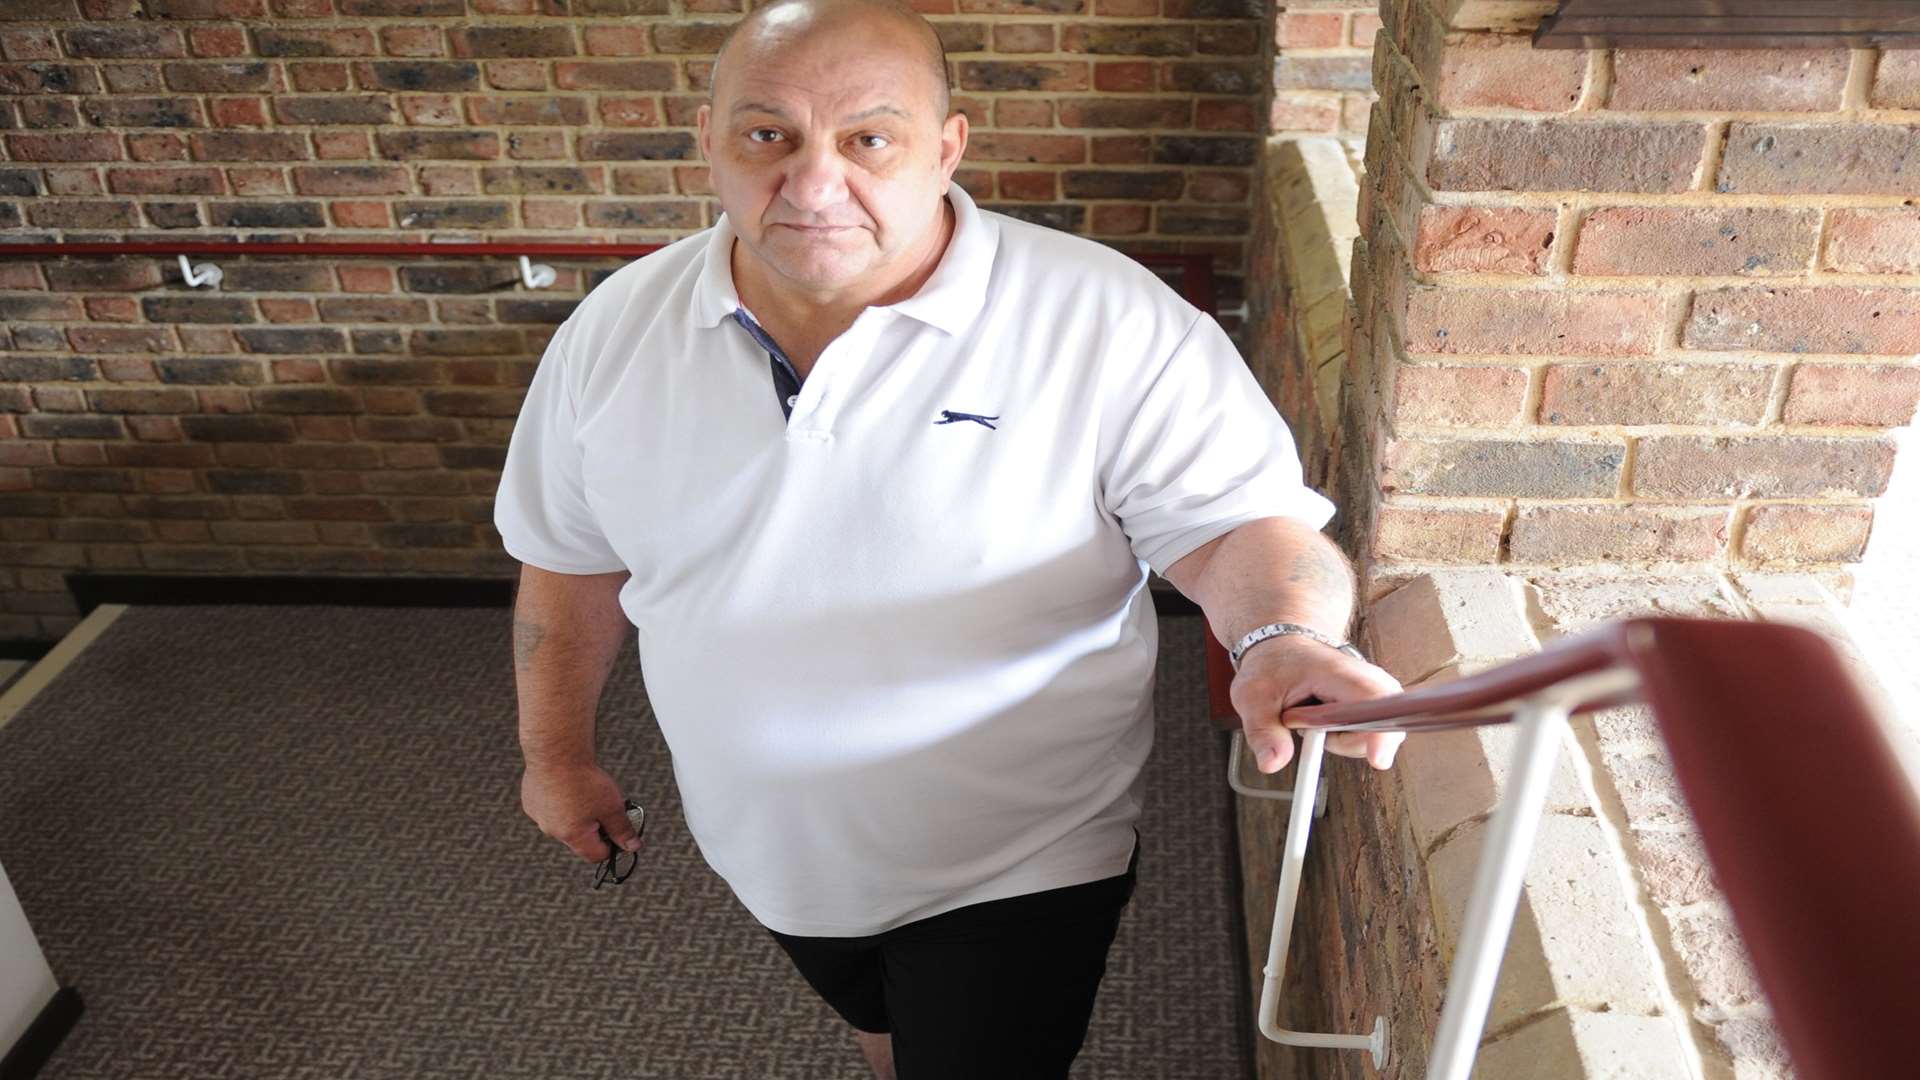 Resident Stephen Harber has lung cancer and struggles to get up the stairs.